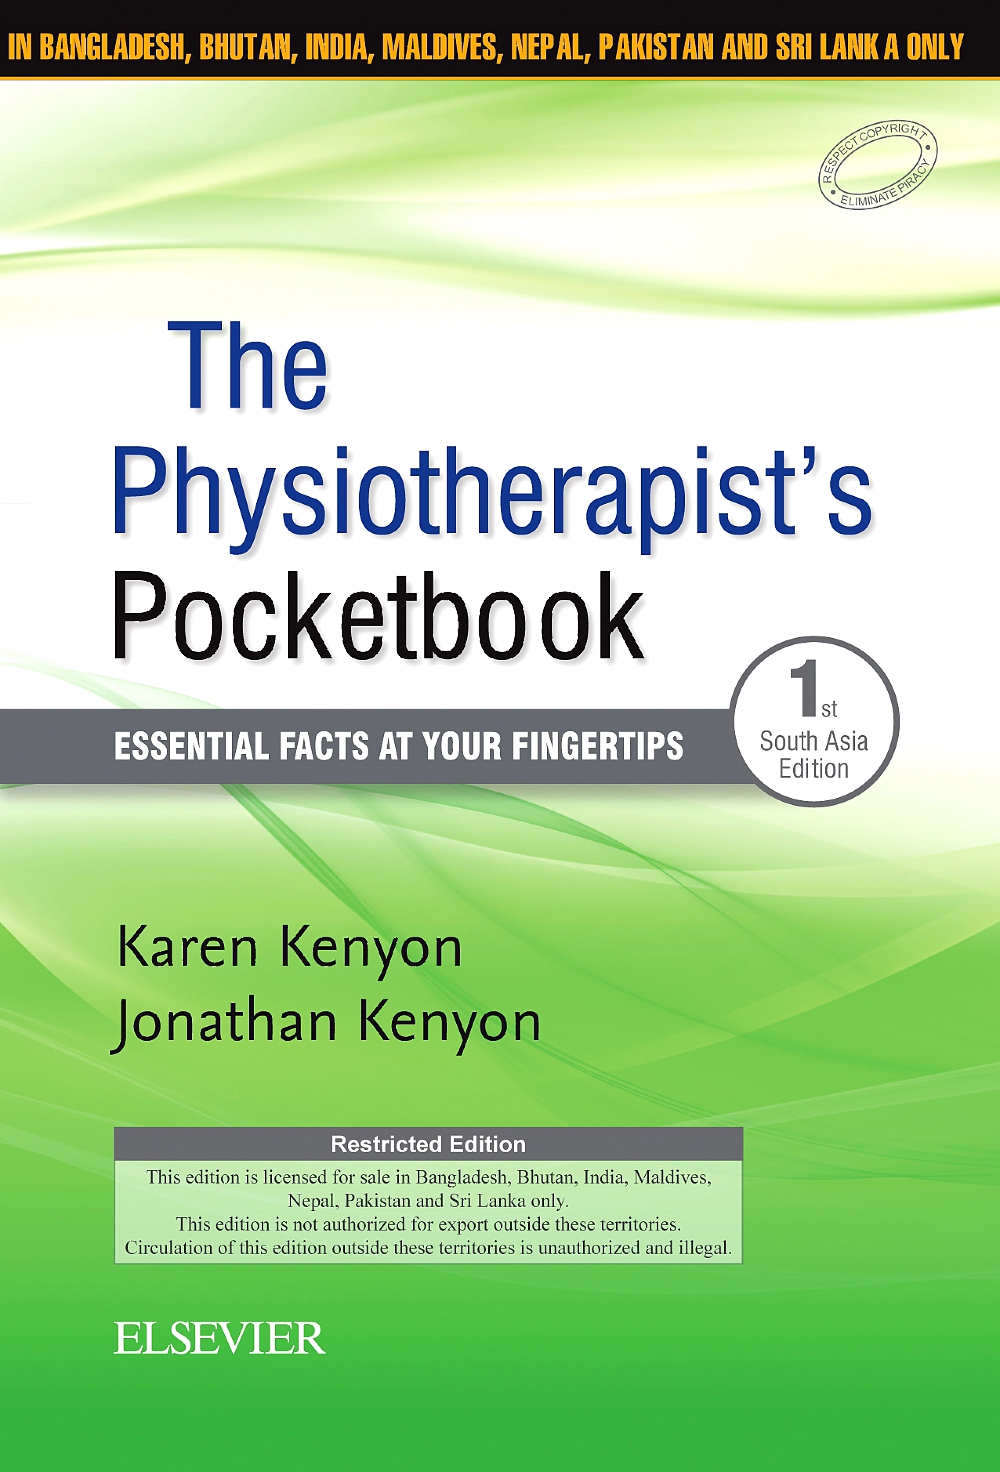 The Physiotherapist's Pocketbook, First South Asia Edition: Essential Facts at Your Fingertips